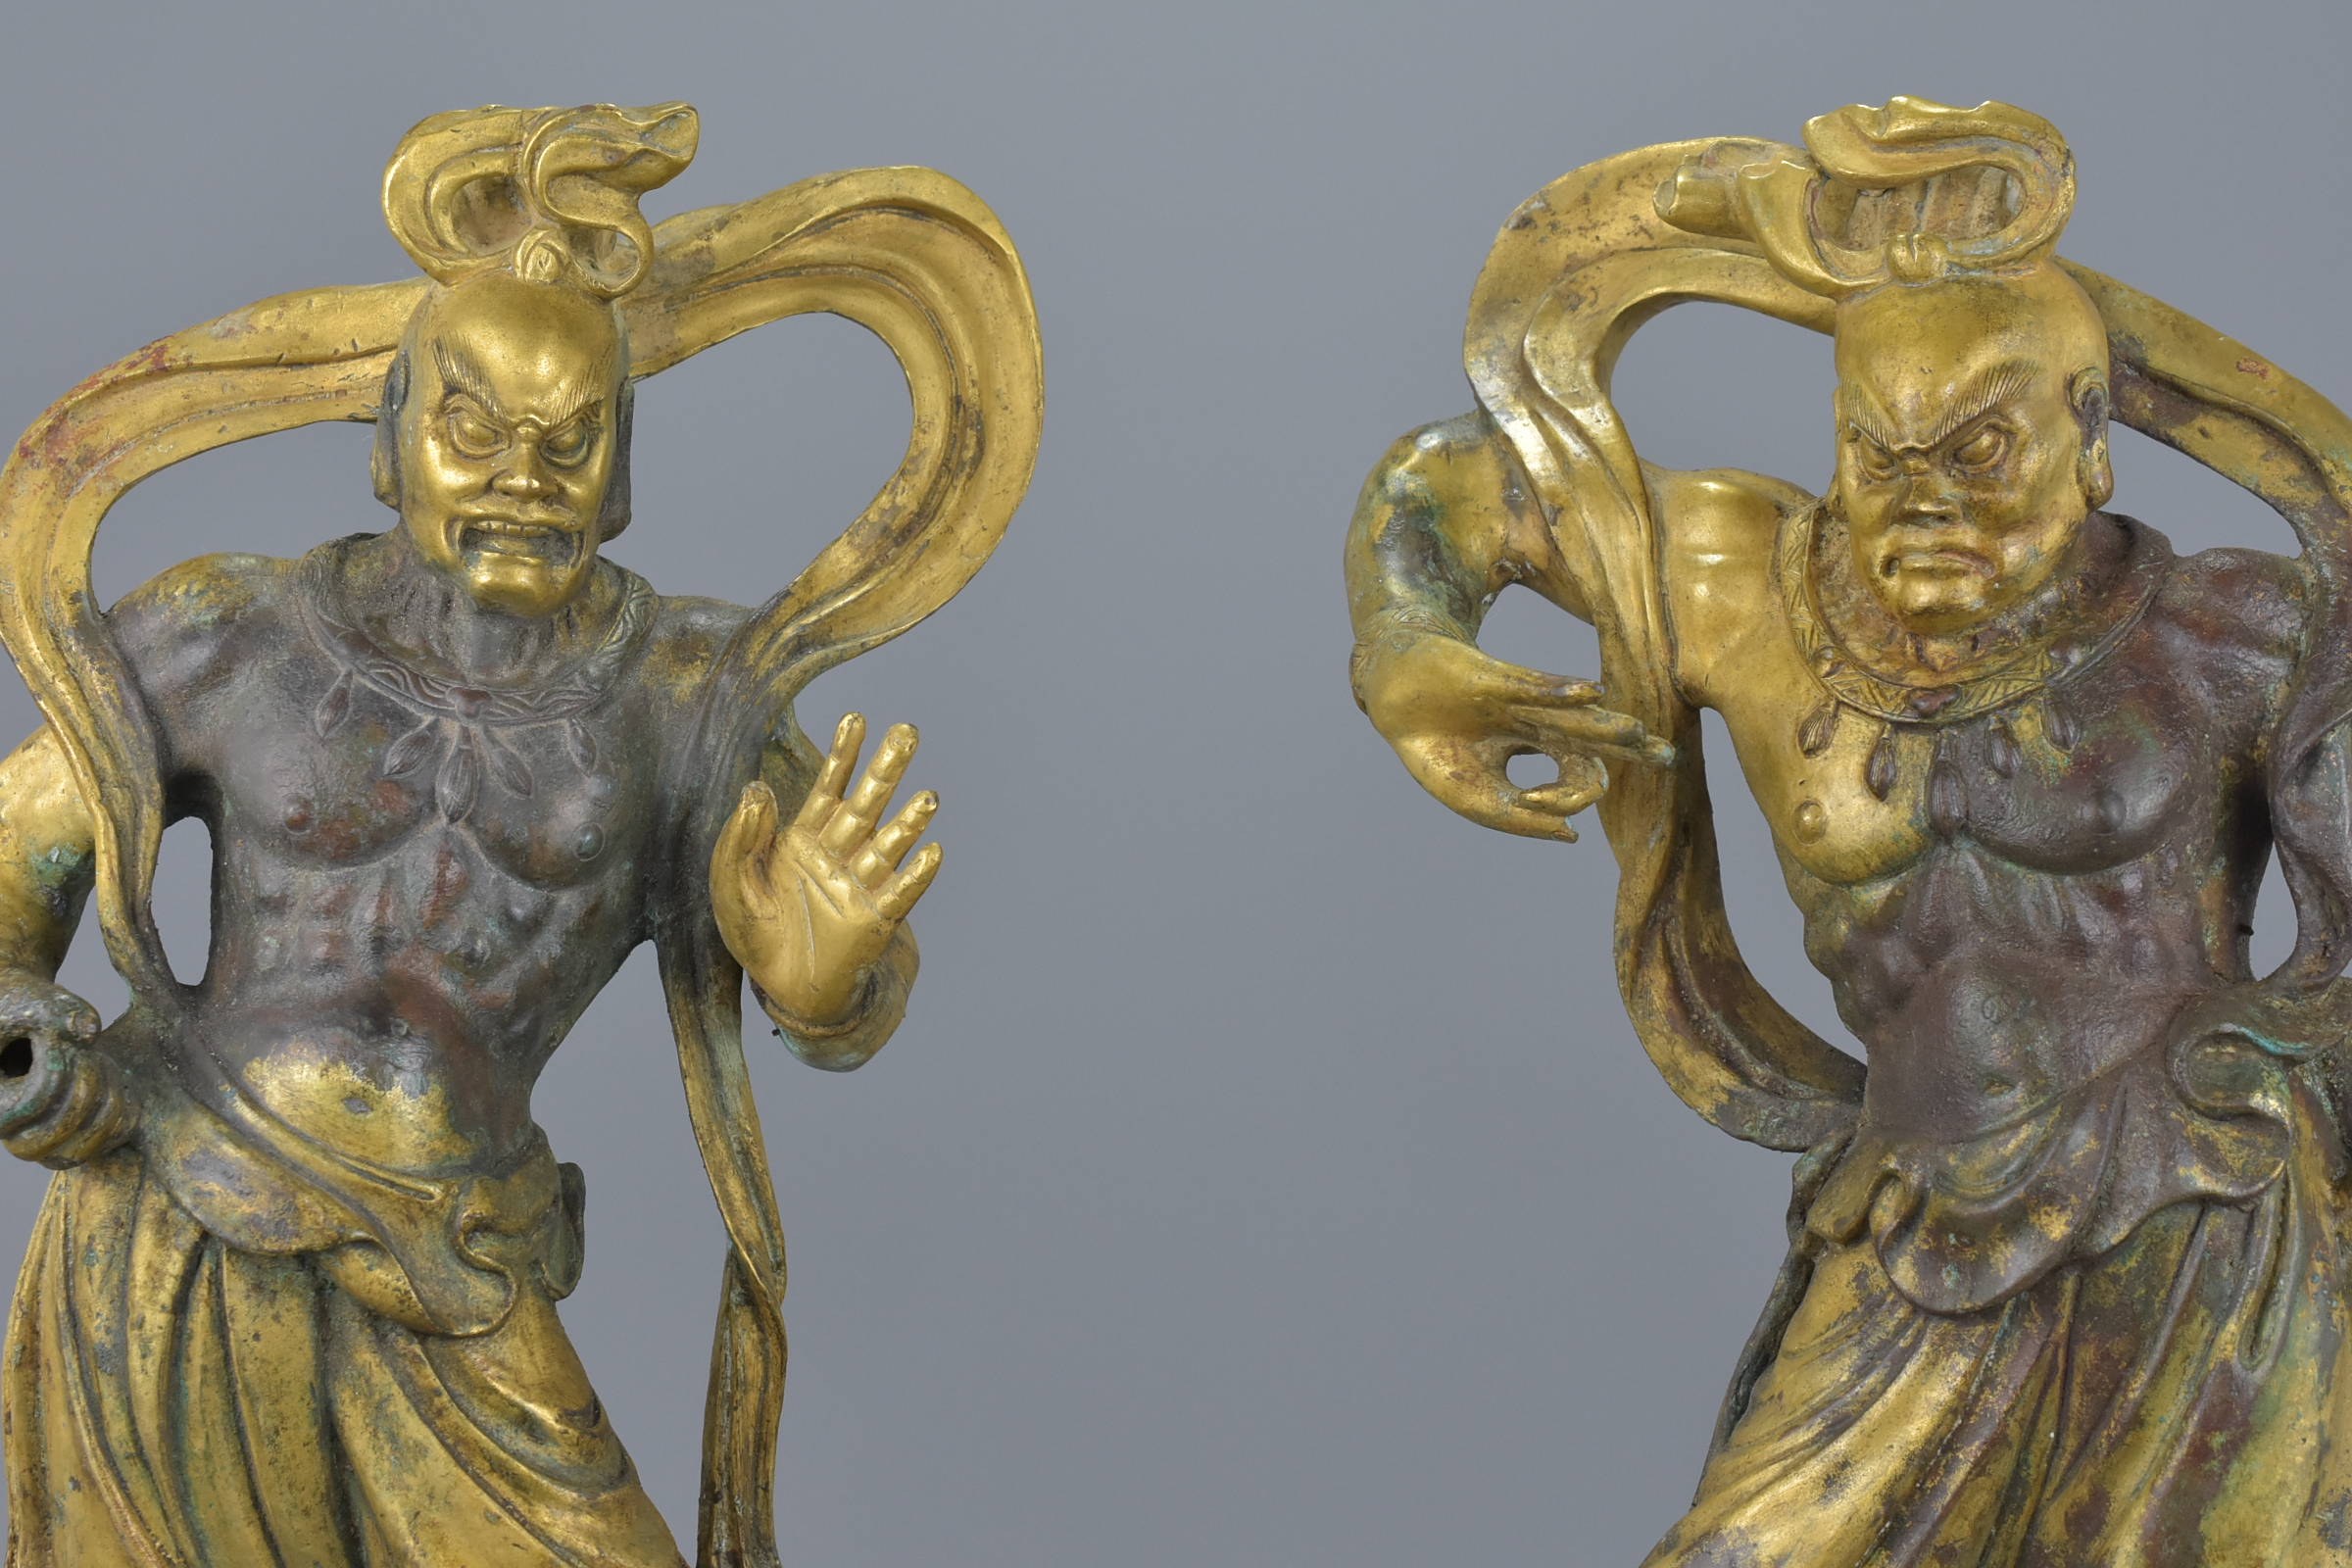 A pair of Chinese gilt bronze figures of Guardians standing on Mythical beasts. 37cm tall 4882 grams - Image 6 of 8